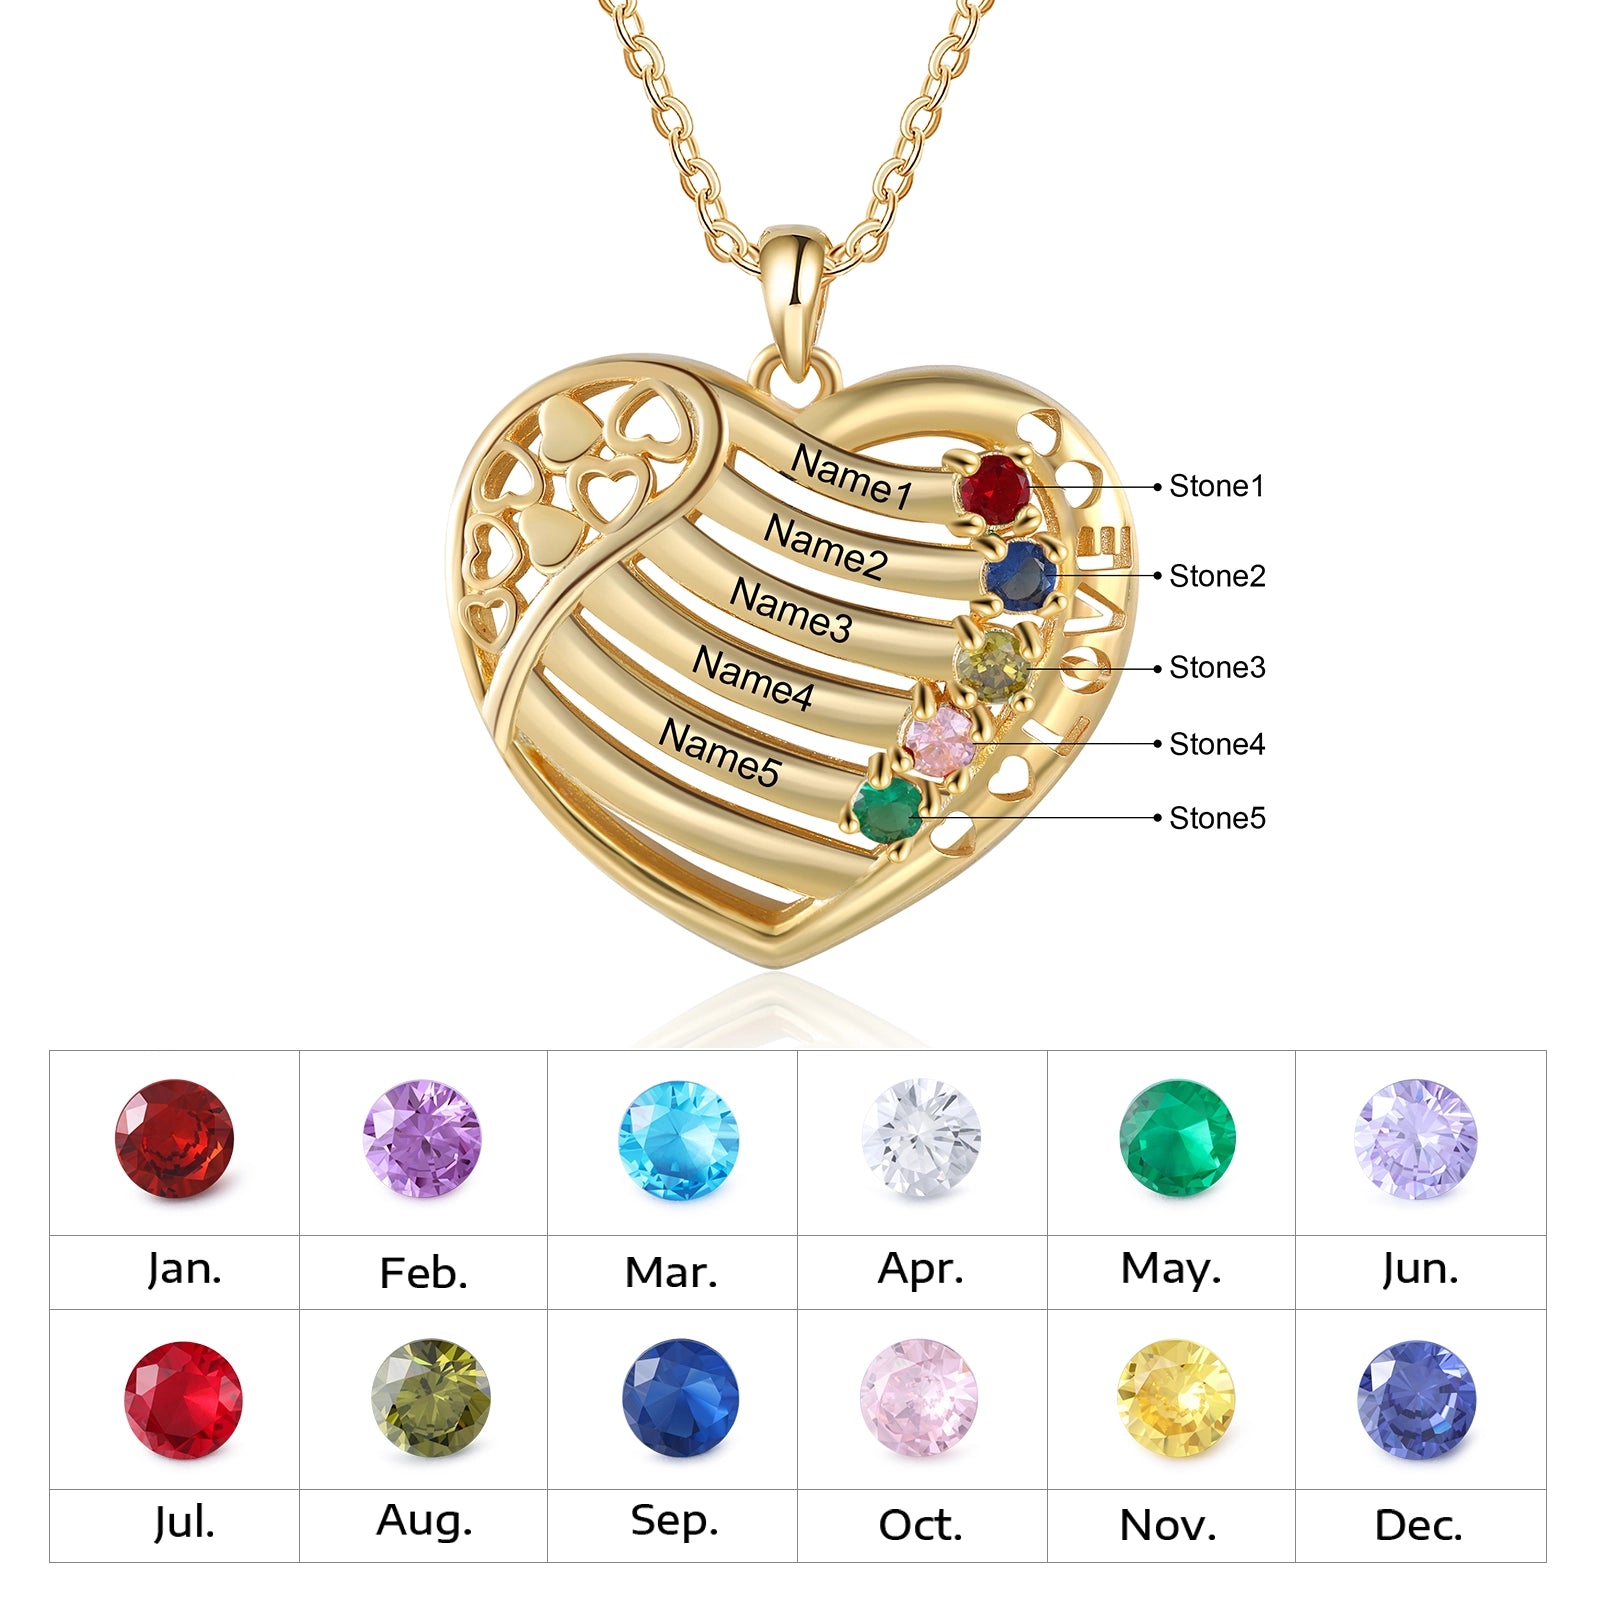 Customized Birthstone Heart Necklace - Personalized Family Jewelry